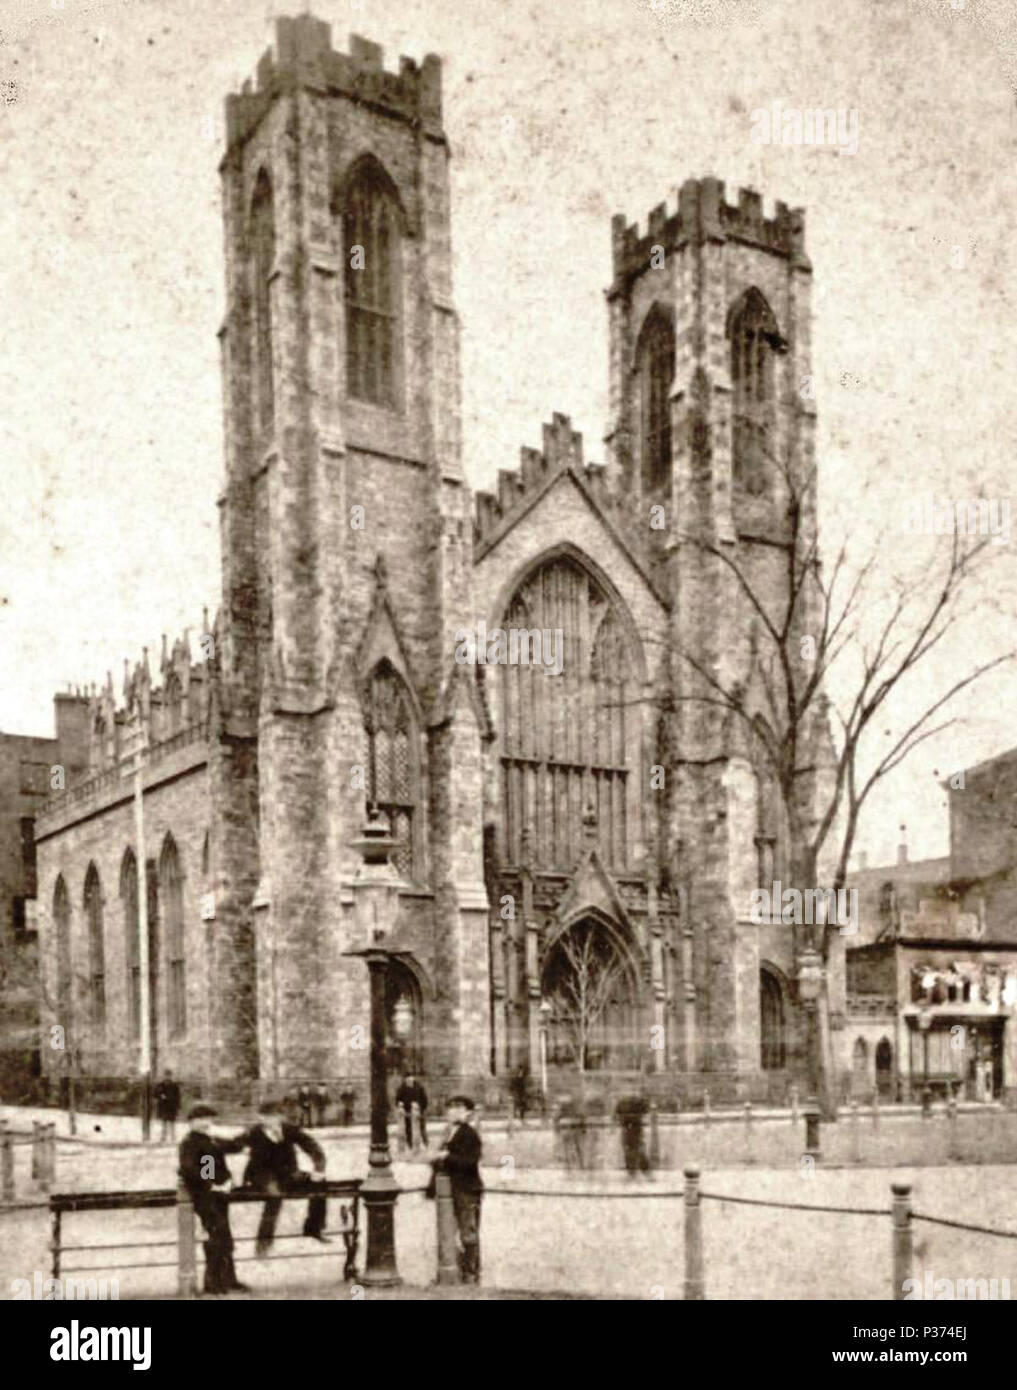 . Dr. Hutton's Church, University Place. between circa 1858 and circa 1879 (According to Appleton's illustrated hand-book of American travel] (1860), a 'Dr. Hutton' led a Dutch Reformed congregation on 'Washington Square'. This church was built in 1837, per History of the city of New York: its origin, rise and progress, Volume 3 (1896), and Dr. Manolus S. Hutton retired from it c.1897, per 'A Mysterious Burglary' New York Times (August 20, 1879).). unknown, cropped by Beyond My Ken (talk) 08:21, 18 November 2010 (UTC) 88 Dr. Hutton's Church, University Place, from Robert N. Dennis collection o Stock Photo